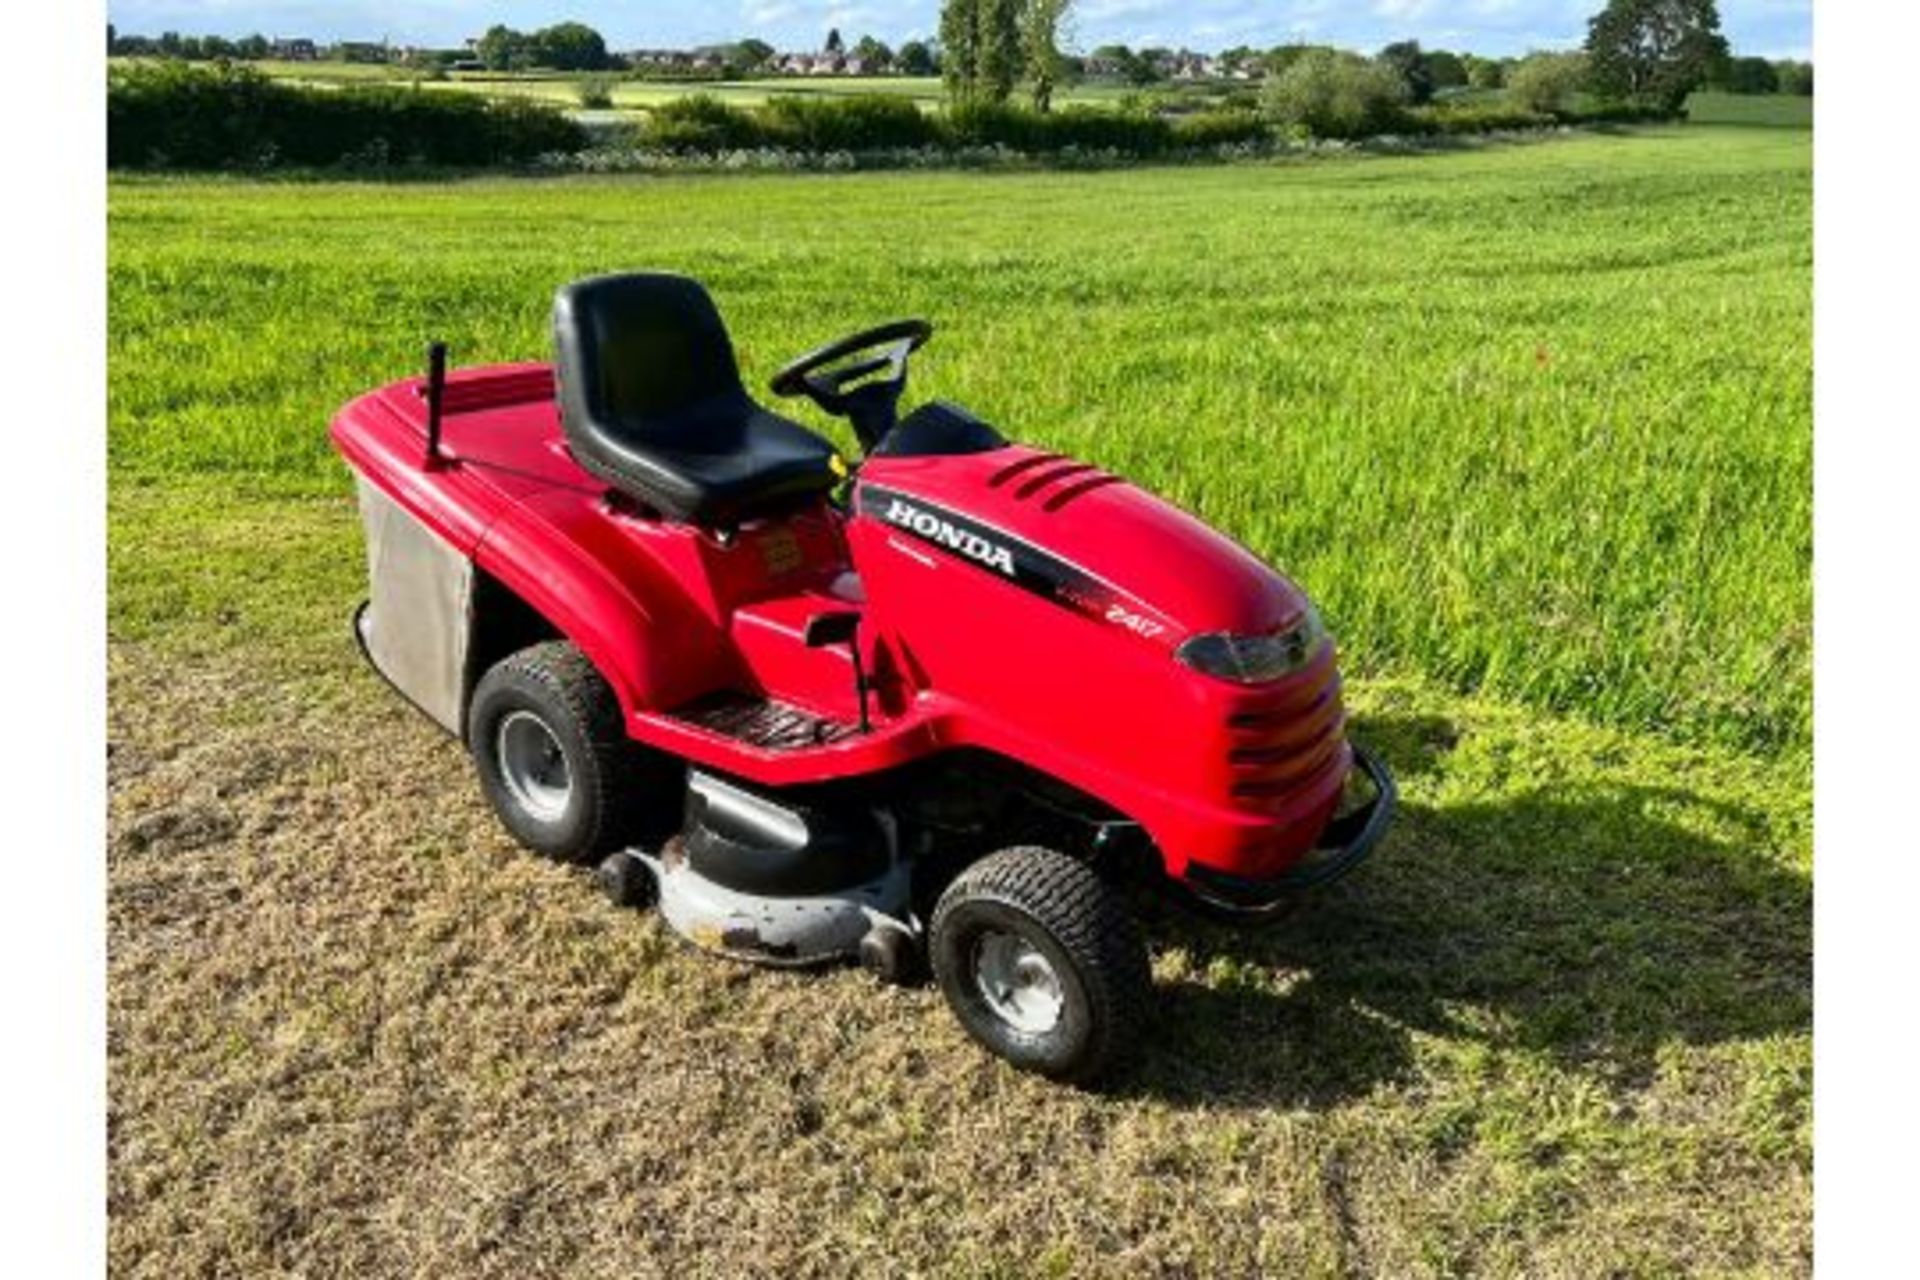 Honda 2417 Ride On Mower With Rear Collector, Runs Drives Cuts And Collects "PLUS VAT"